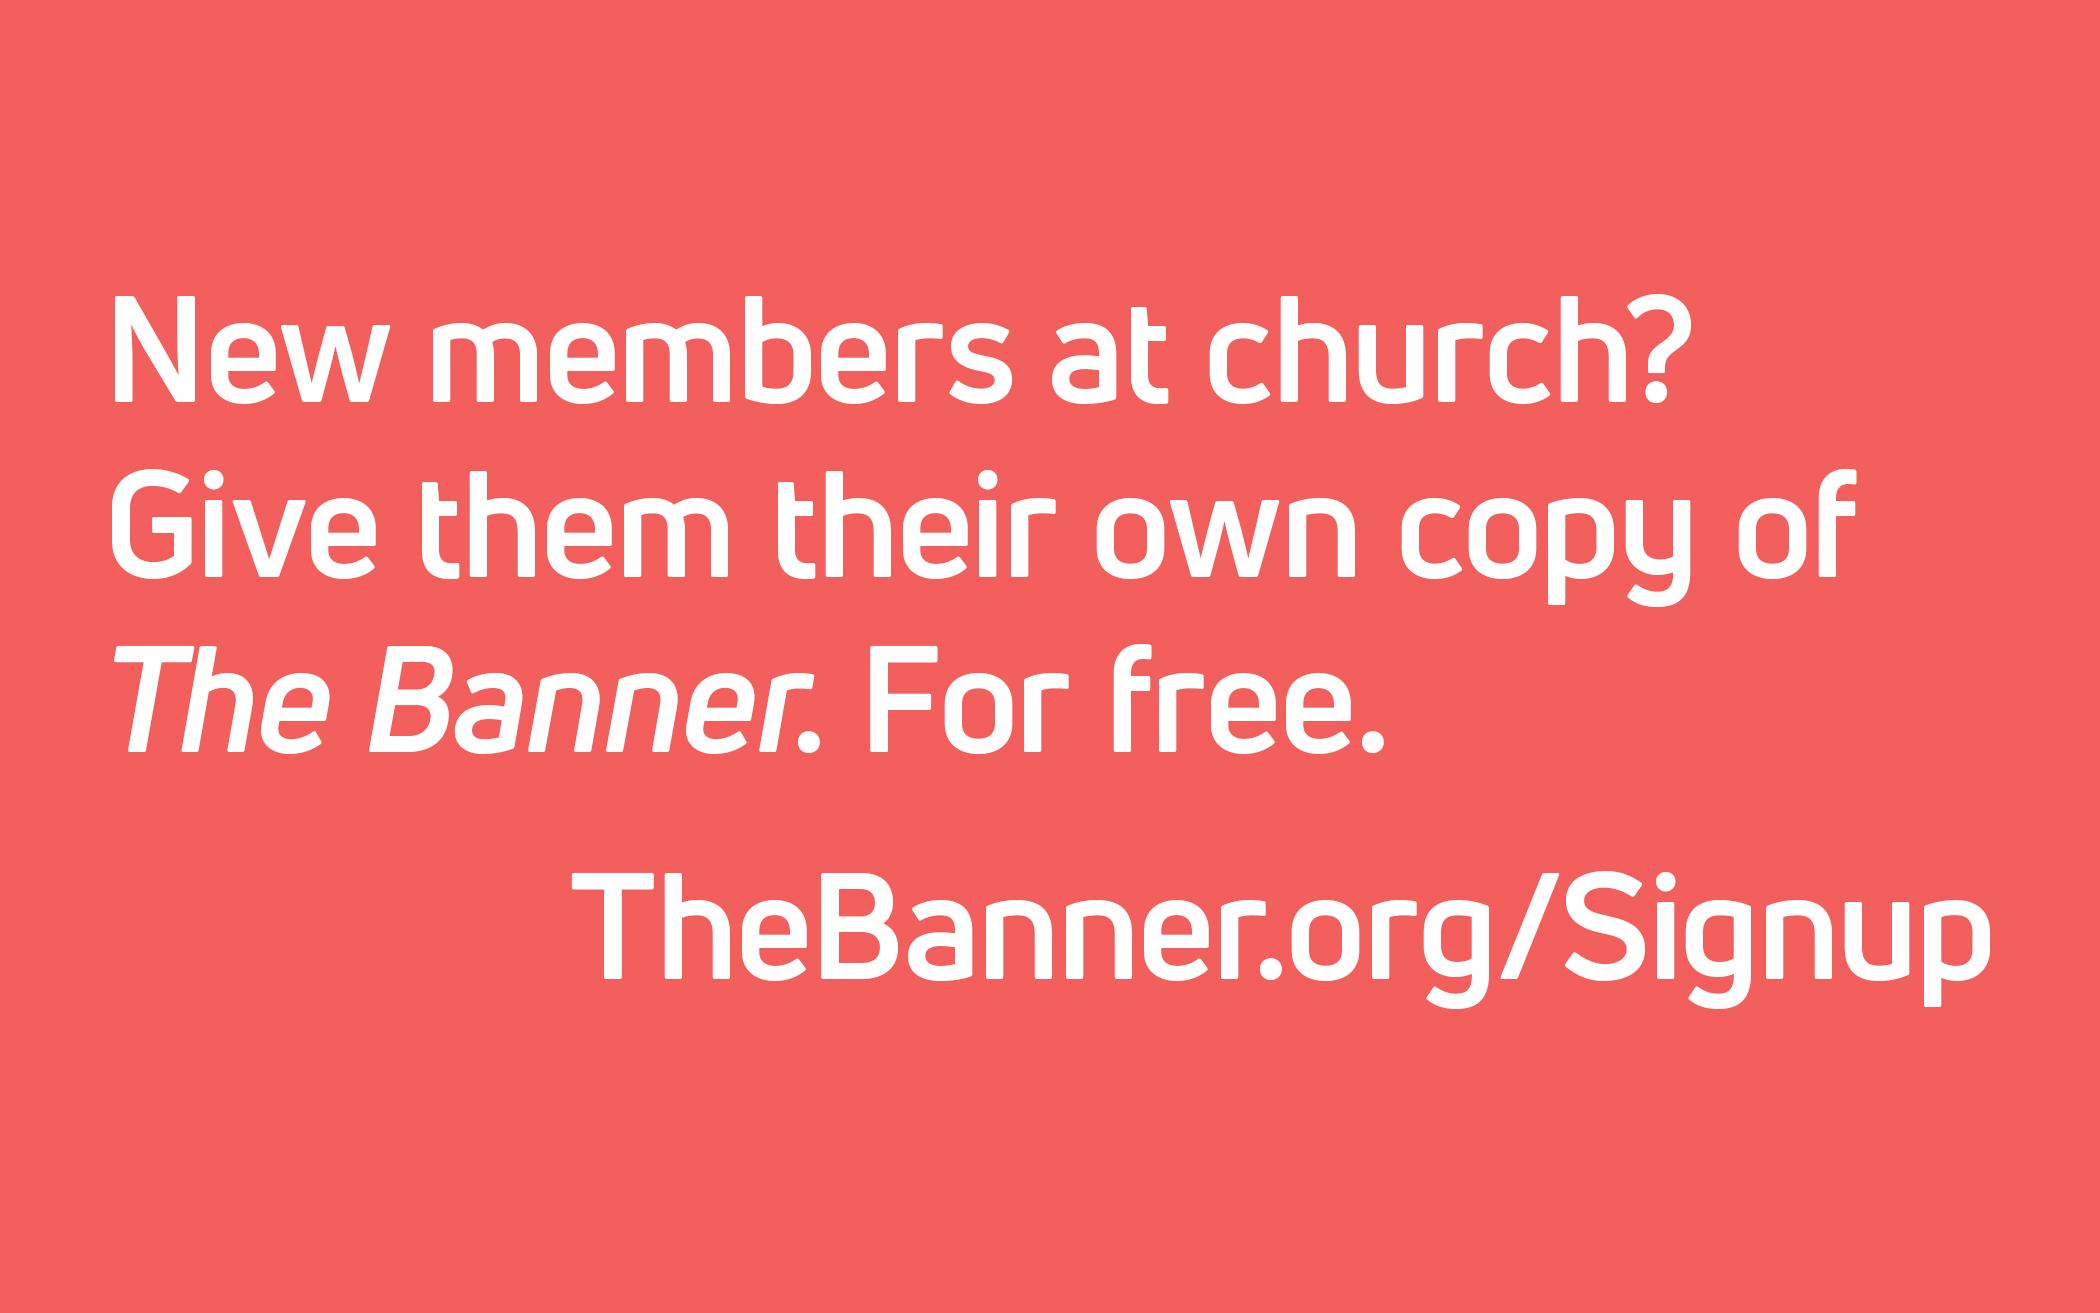 Want to give someone their own copy of The Banner? Sign them up. For free.  TheBanner.org/Signup